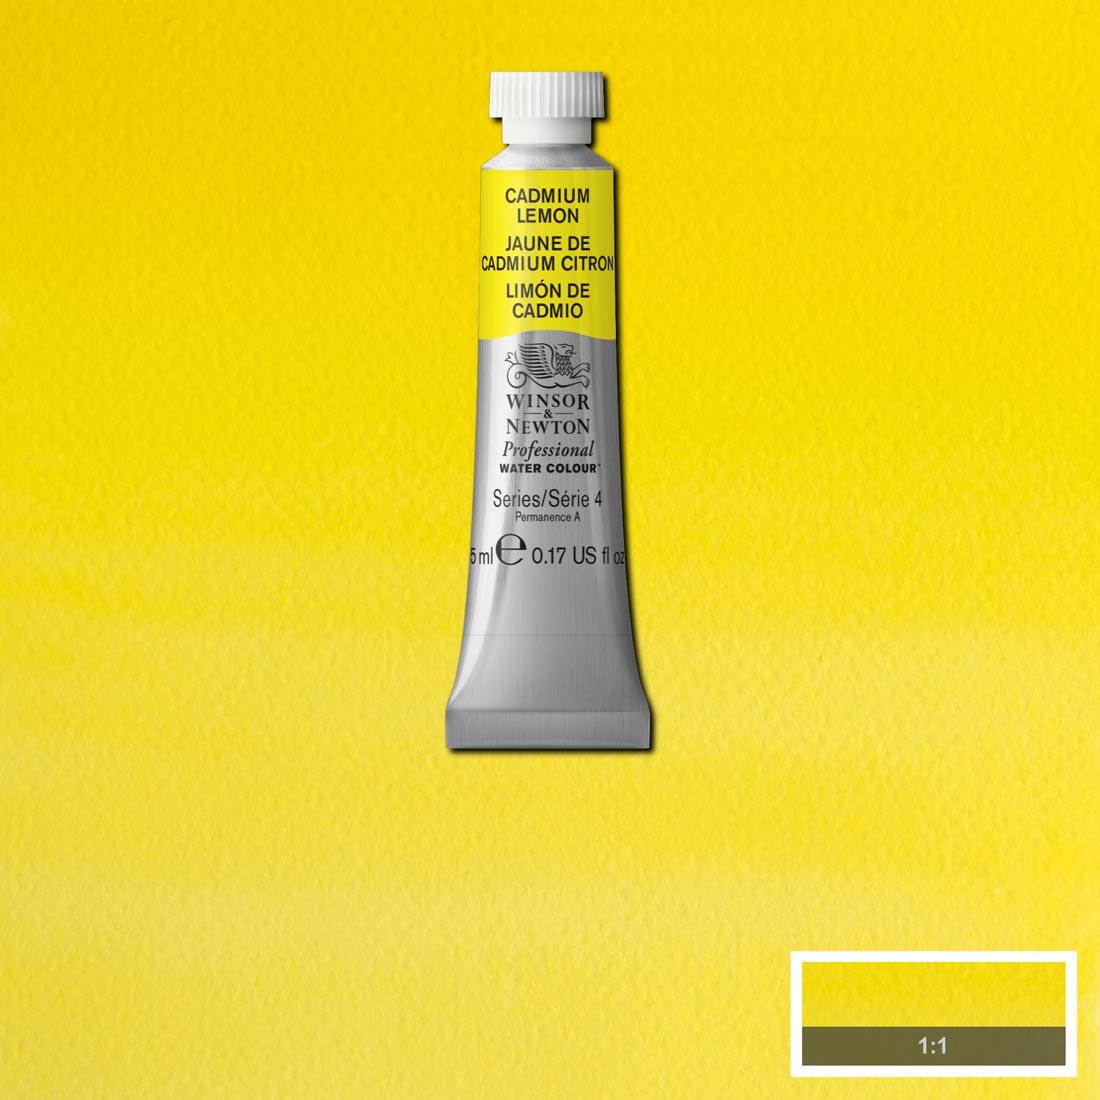 Tube of Cadmium Lemon Winsor & Newton Professional Water Colour with a paint swatch for the background